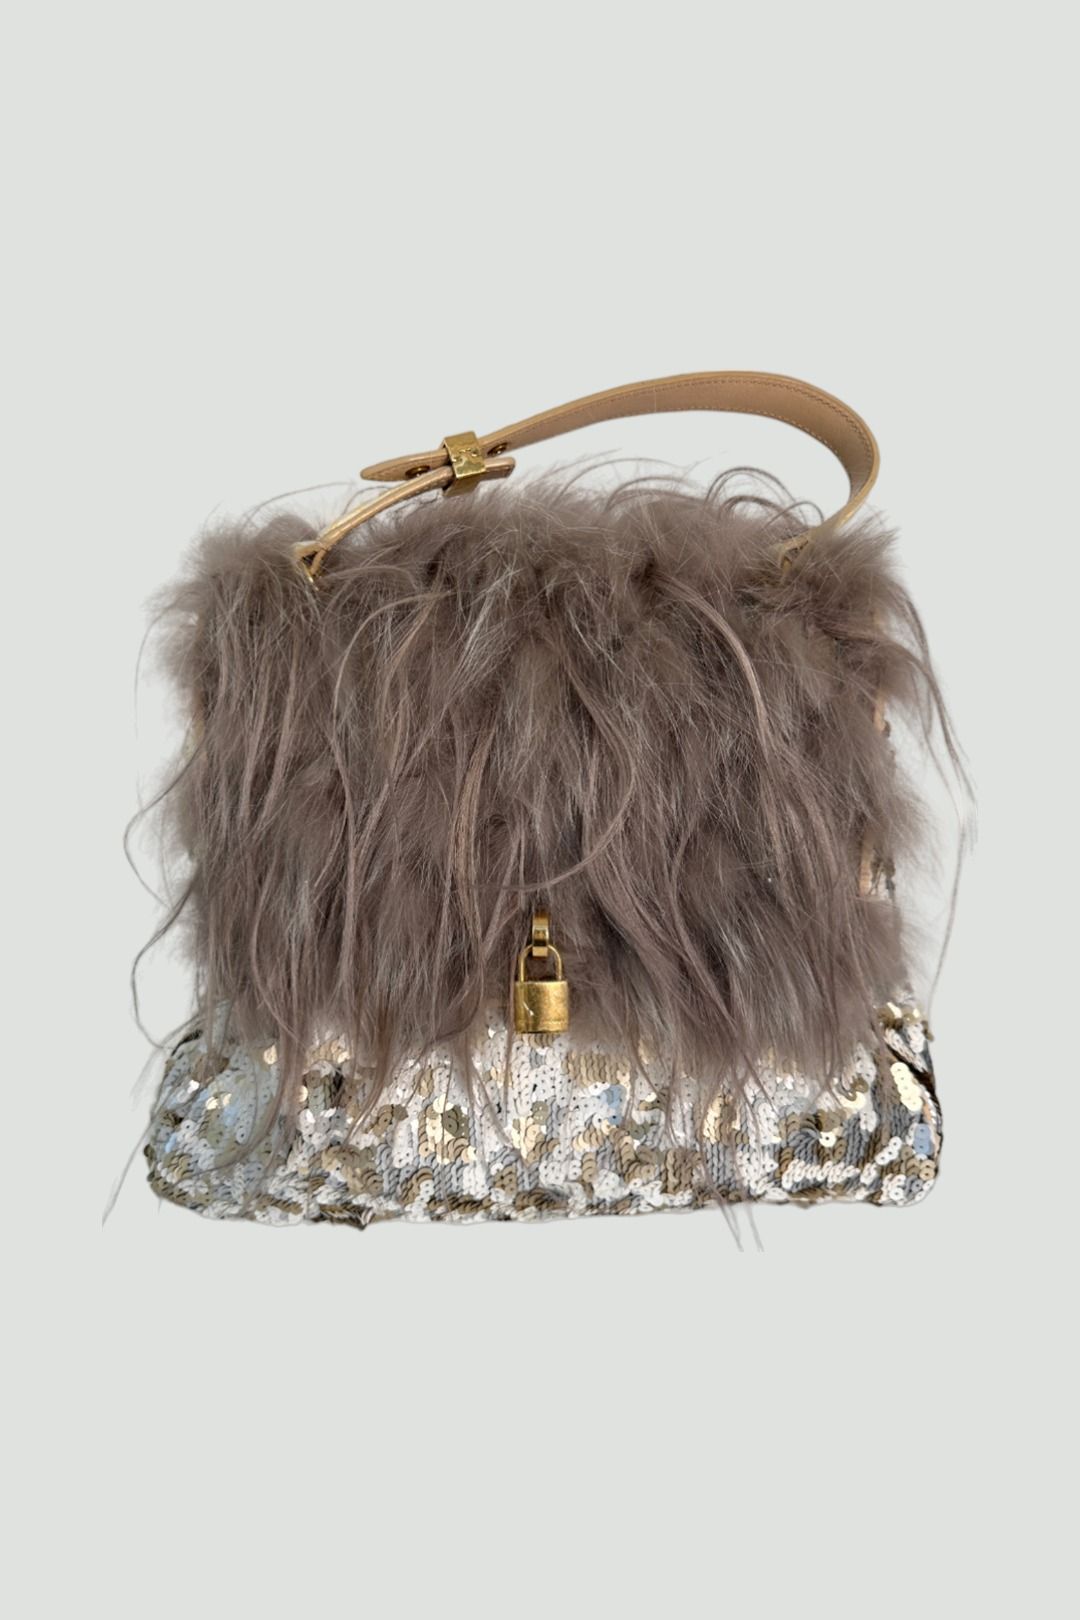 Marc by Marc Jacobs Silver and Gold Sequined Gilda Flap Handbag